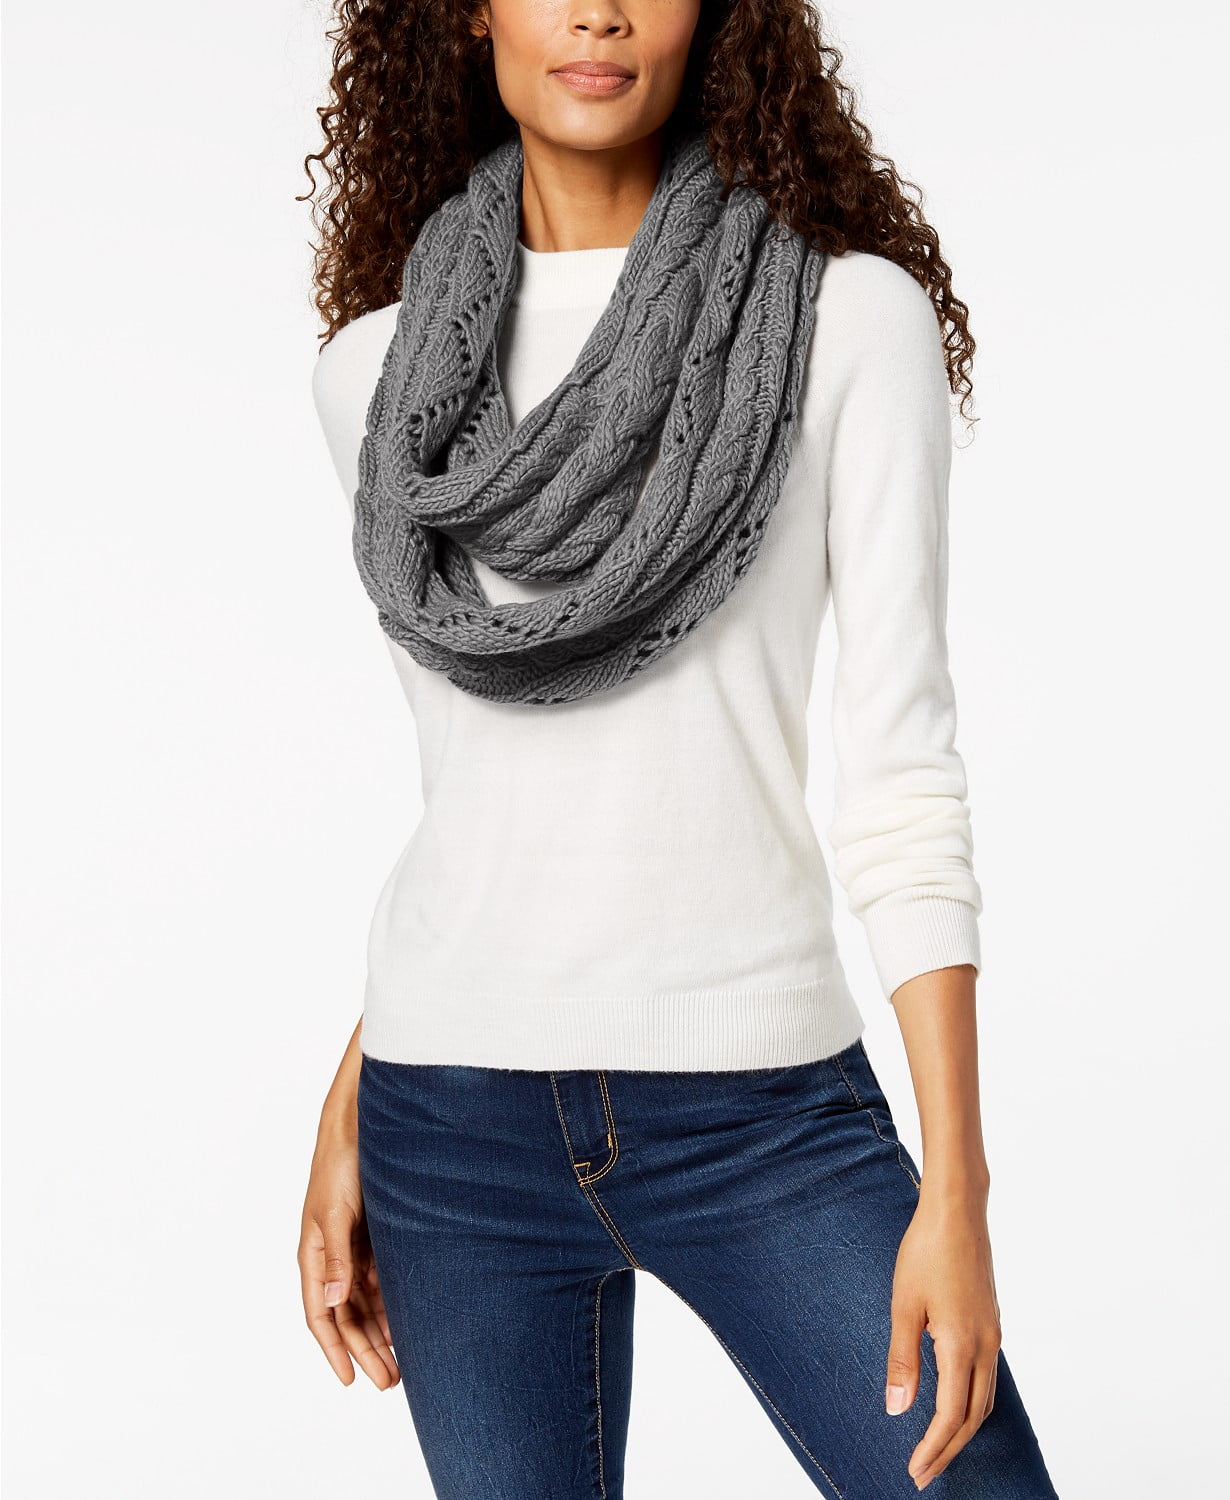 michael kors cable knit scarf